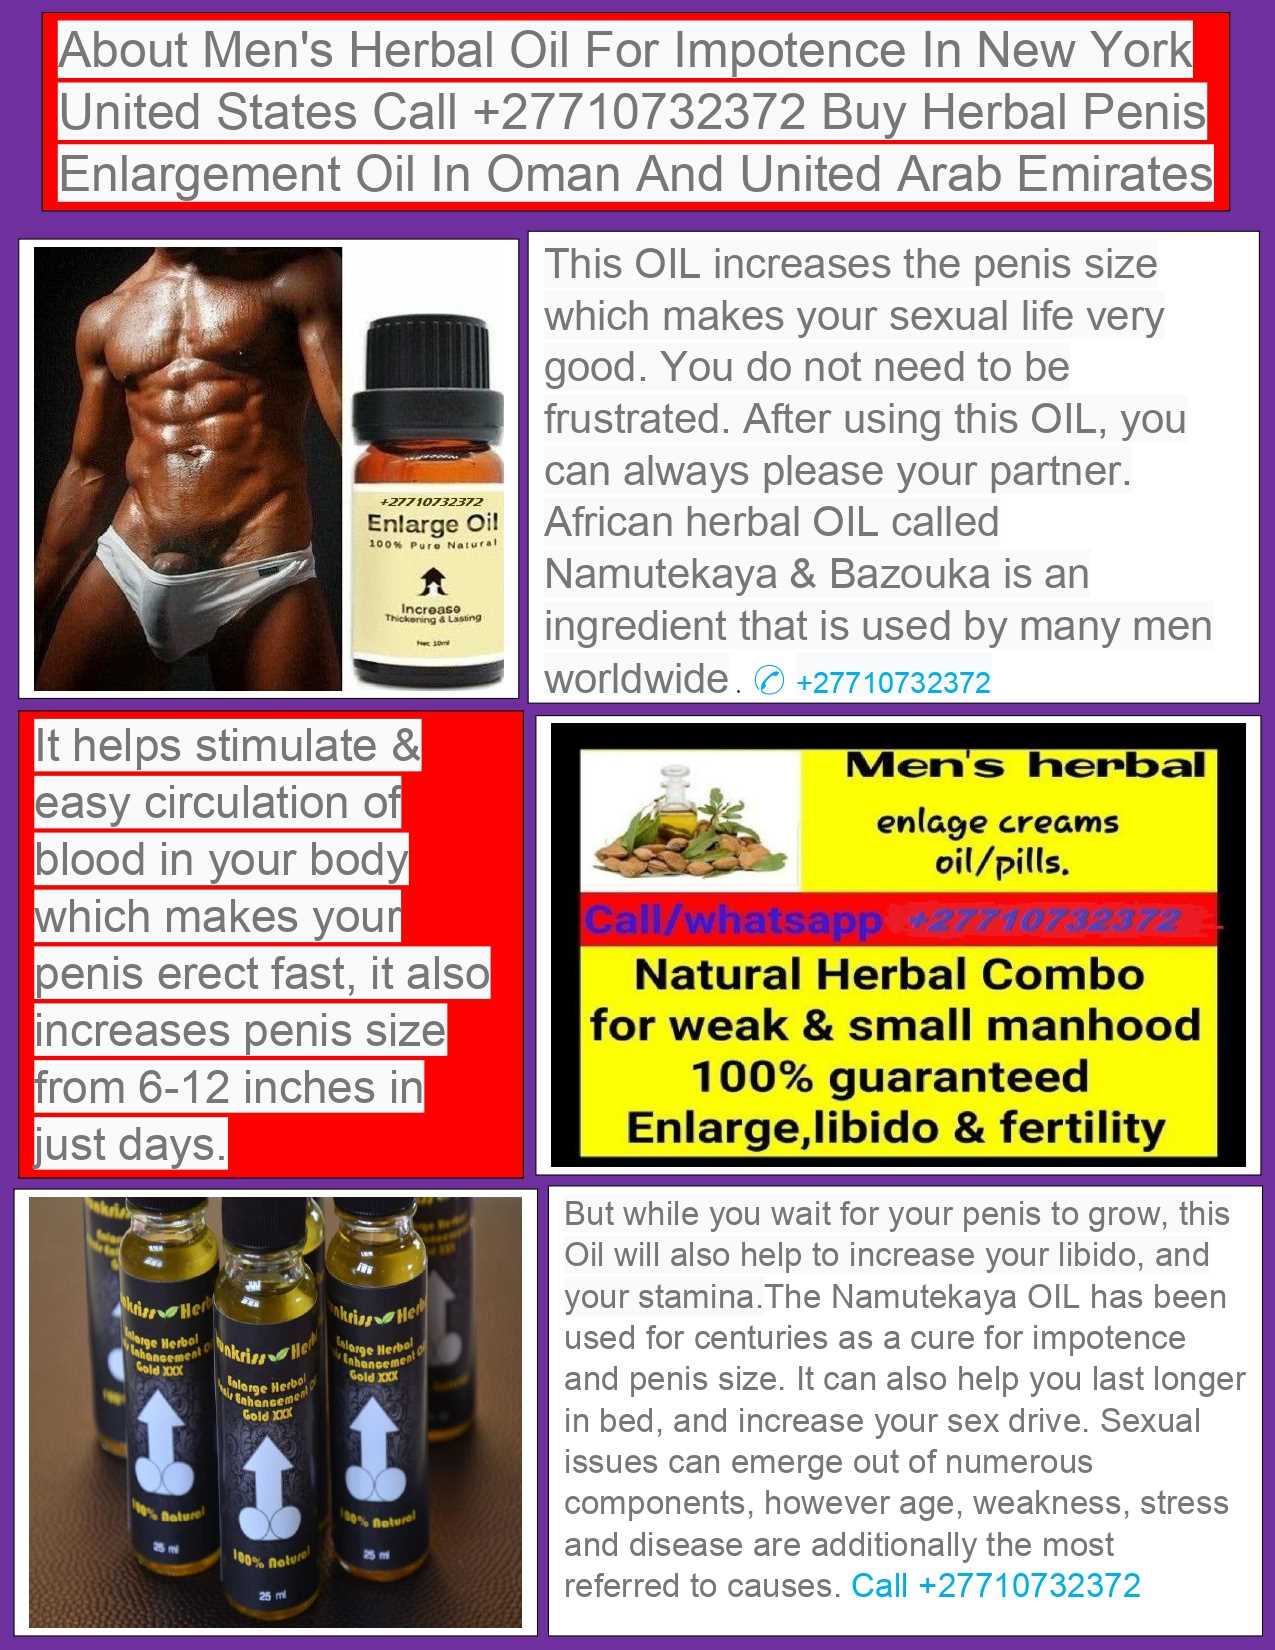 About Men's Herbal Oil For Impotence In Denpasar City in Indonesia And New York United States Call ✆ +27710732372 Penis Enlargement Oil In Taree Town in Australia, India, Oman And United Arab Emirates